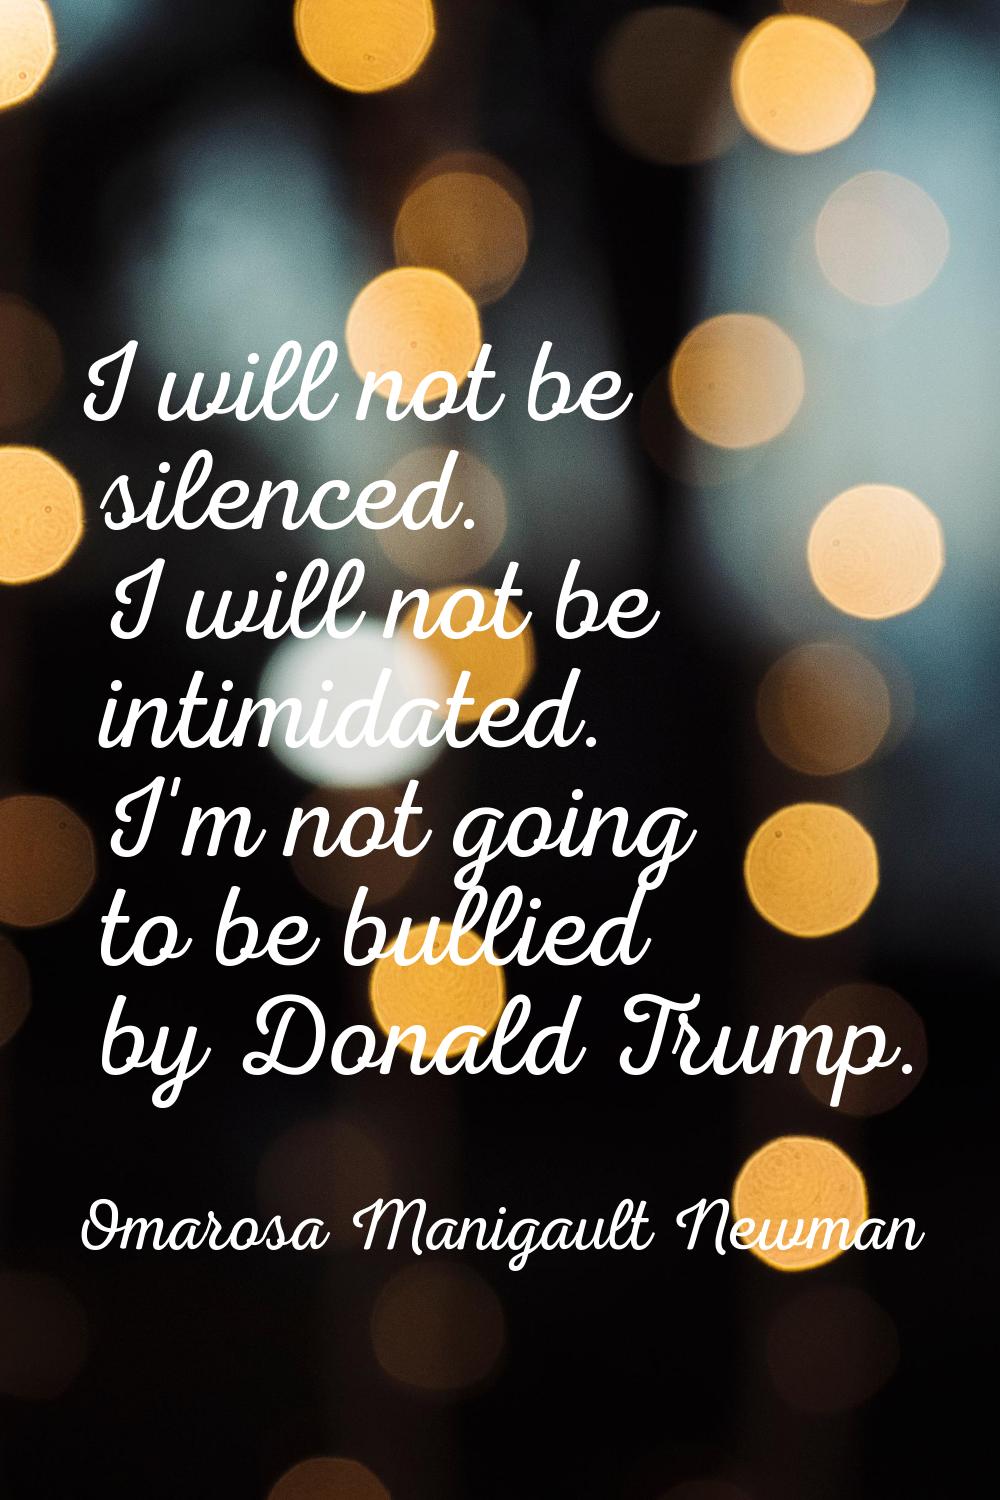 I will not be silenced. I will not be intimidated. I'm not going to be bullied by Donald Trump.